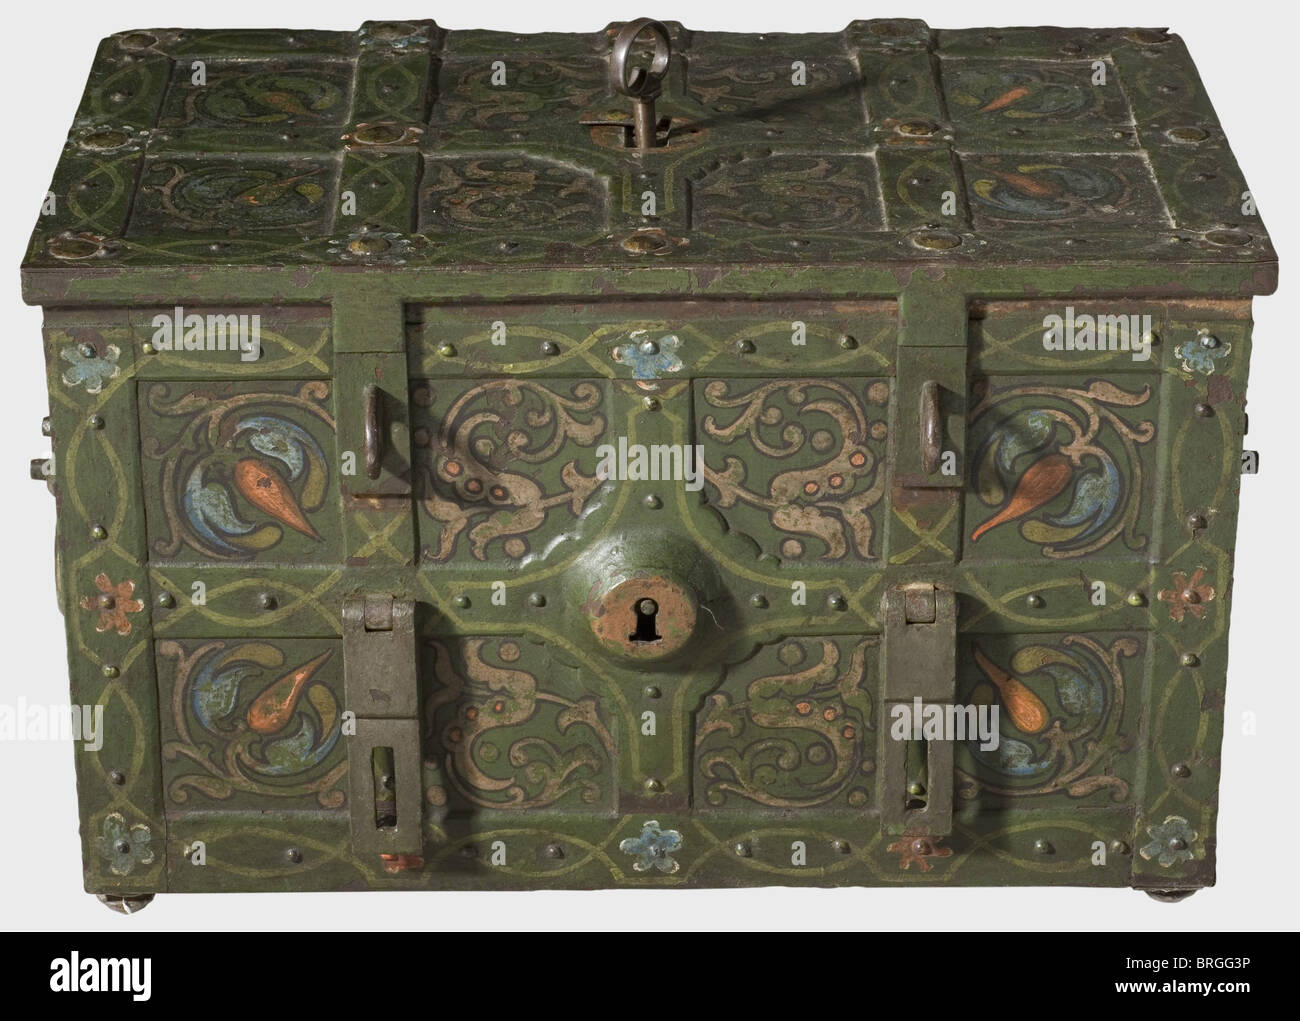 A German war chest painted in colour,2nd half of the 17th century Rectangular iron trunk with flattened ball feet and riveted,crossed strap fittings.The lid has a covered central keyhole.On the front a false lock with an embossed keyhole cover and two hasps.Movable carrying handles on the sides.Original colour paint with vine decoration.The lock in the lid(ward missing)with ten latches worked over the corners.The open work,screw fastened lock cover is richly provided with curved bands(four of the ball-headed screws missing).The interior is lined wi,Additional-Rights-Clearences-Not Available Stock Photo